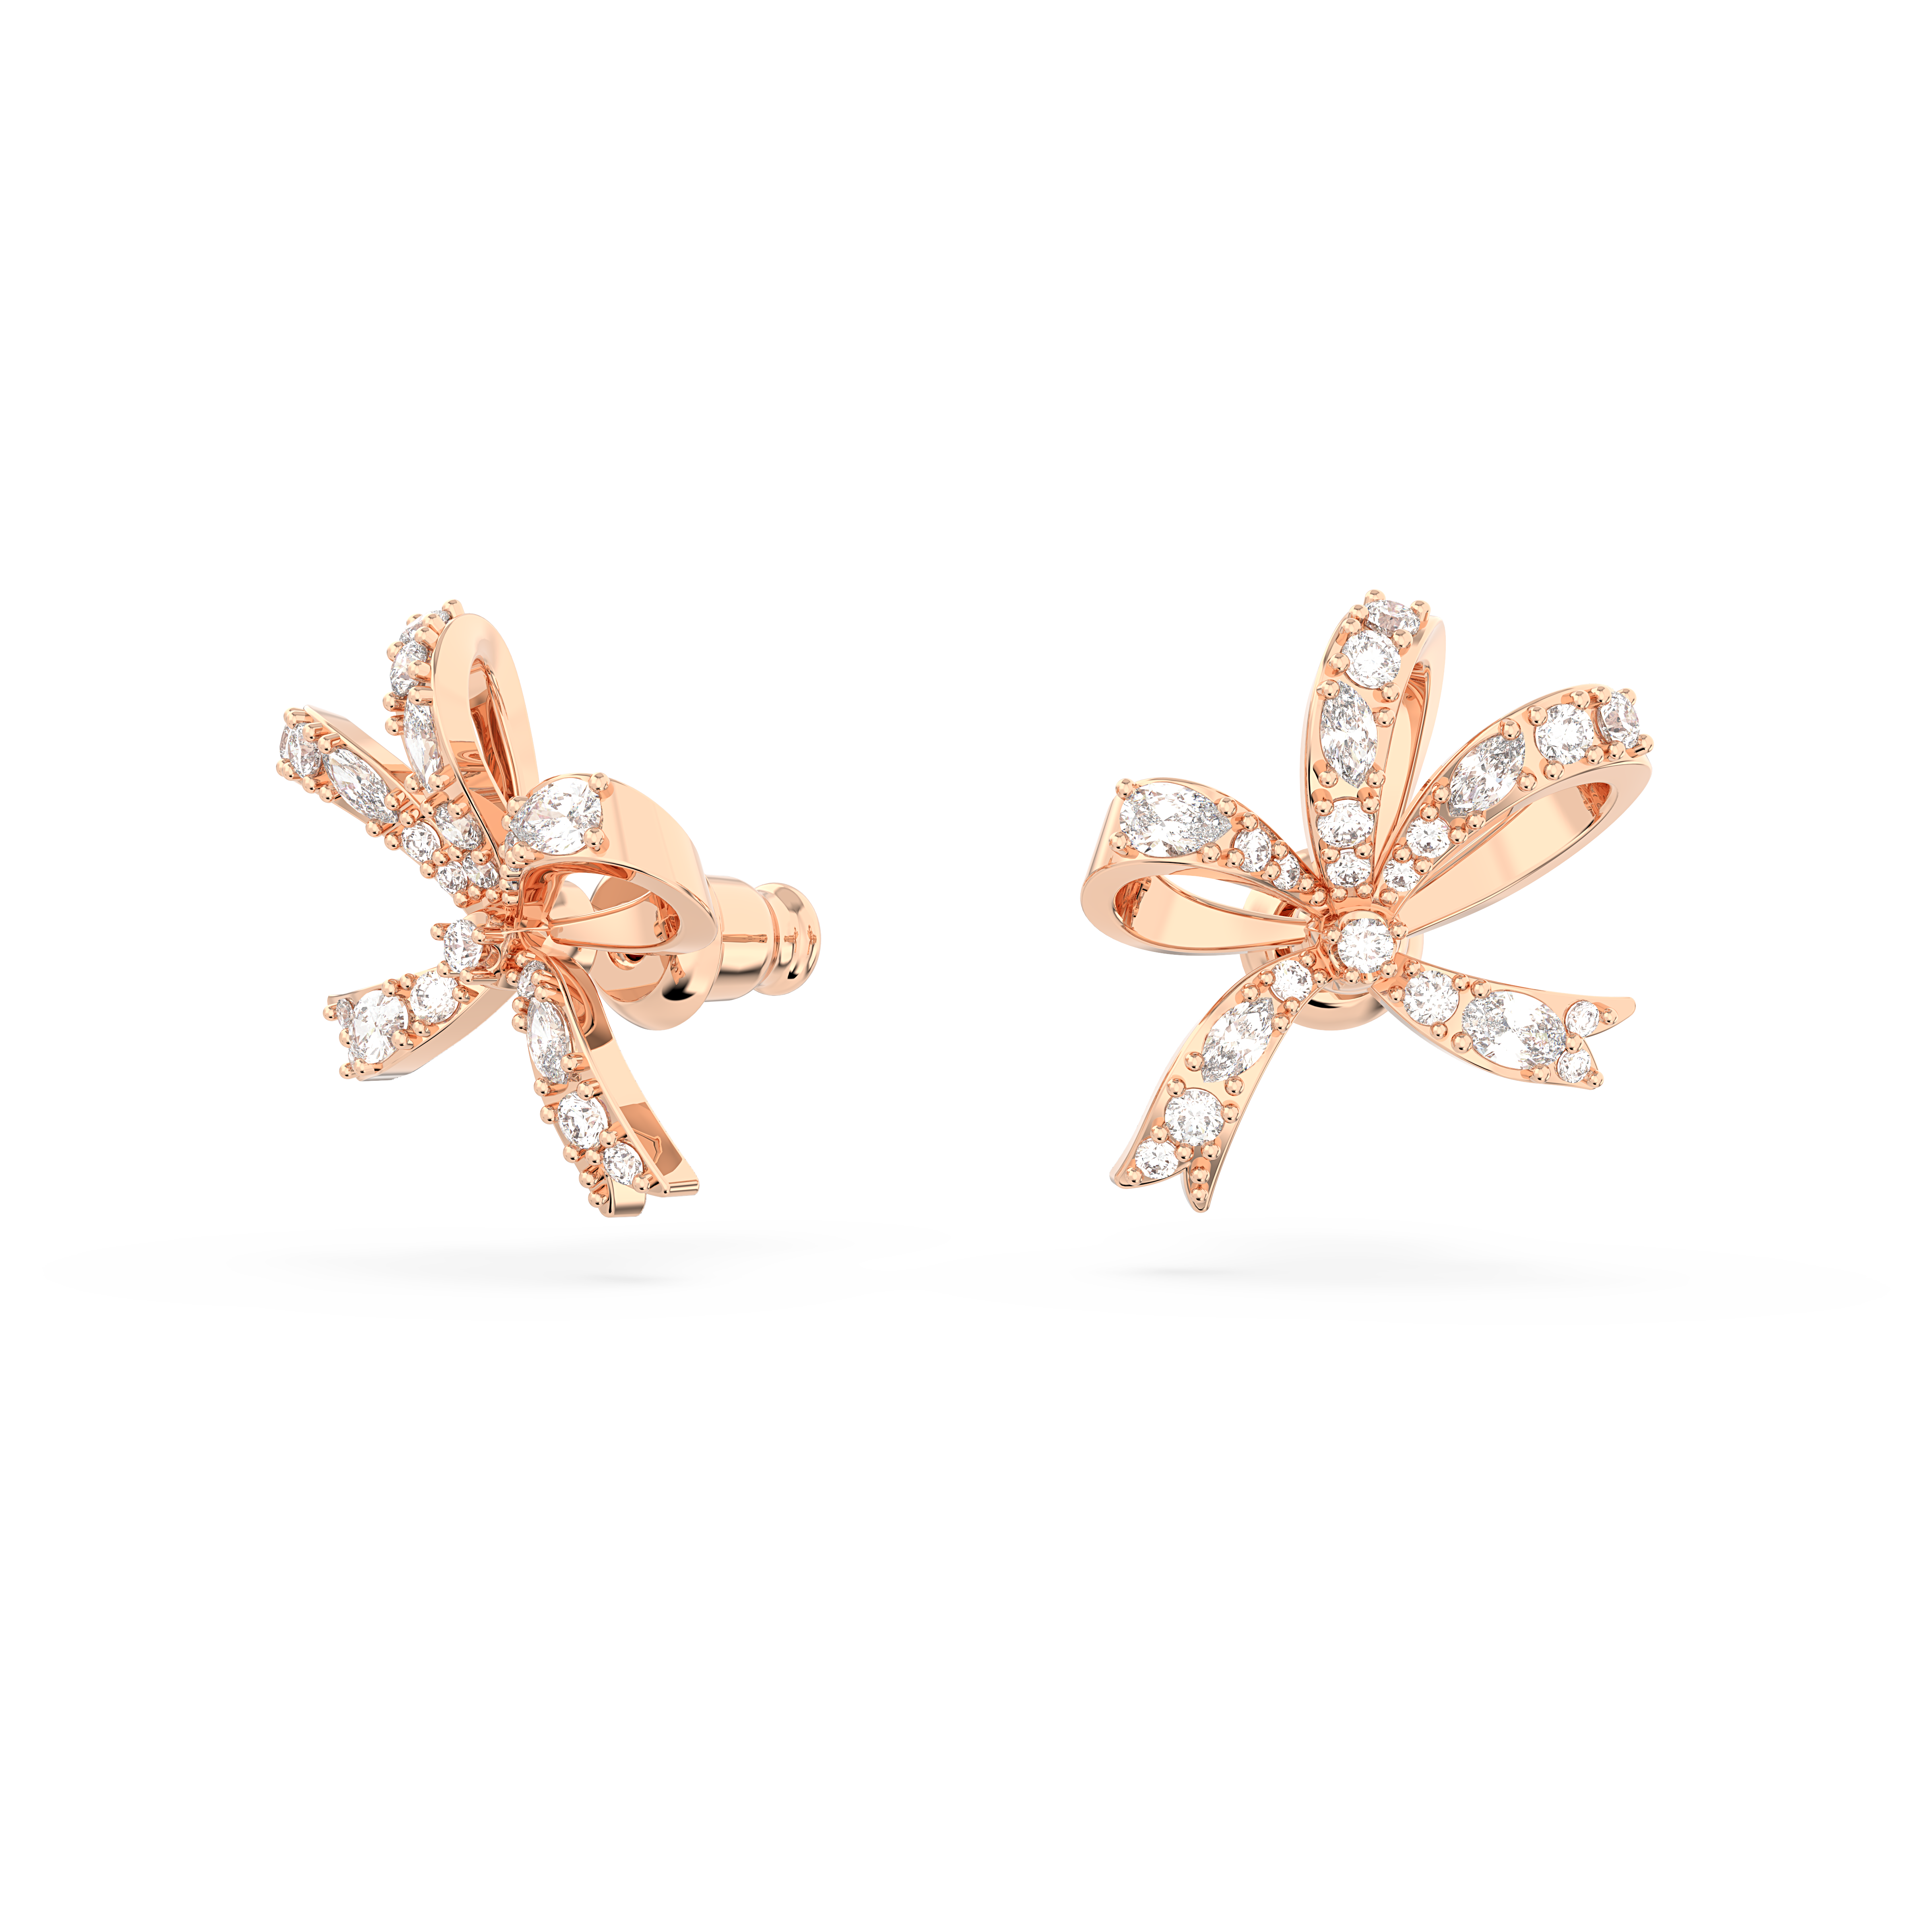 SWAROVSKI VOLTA STUD EARRINGS, BOW, SMALL, WHITE, ROSE GOLD-TONE PLATED 5647572